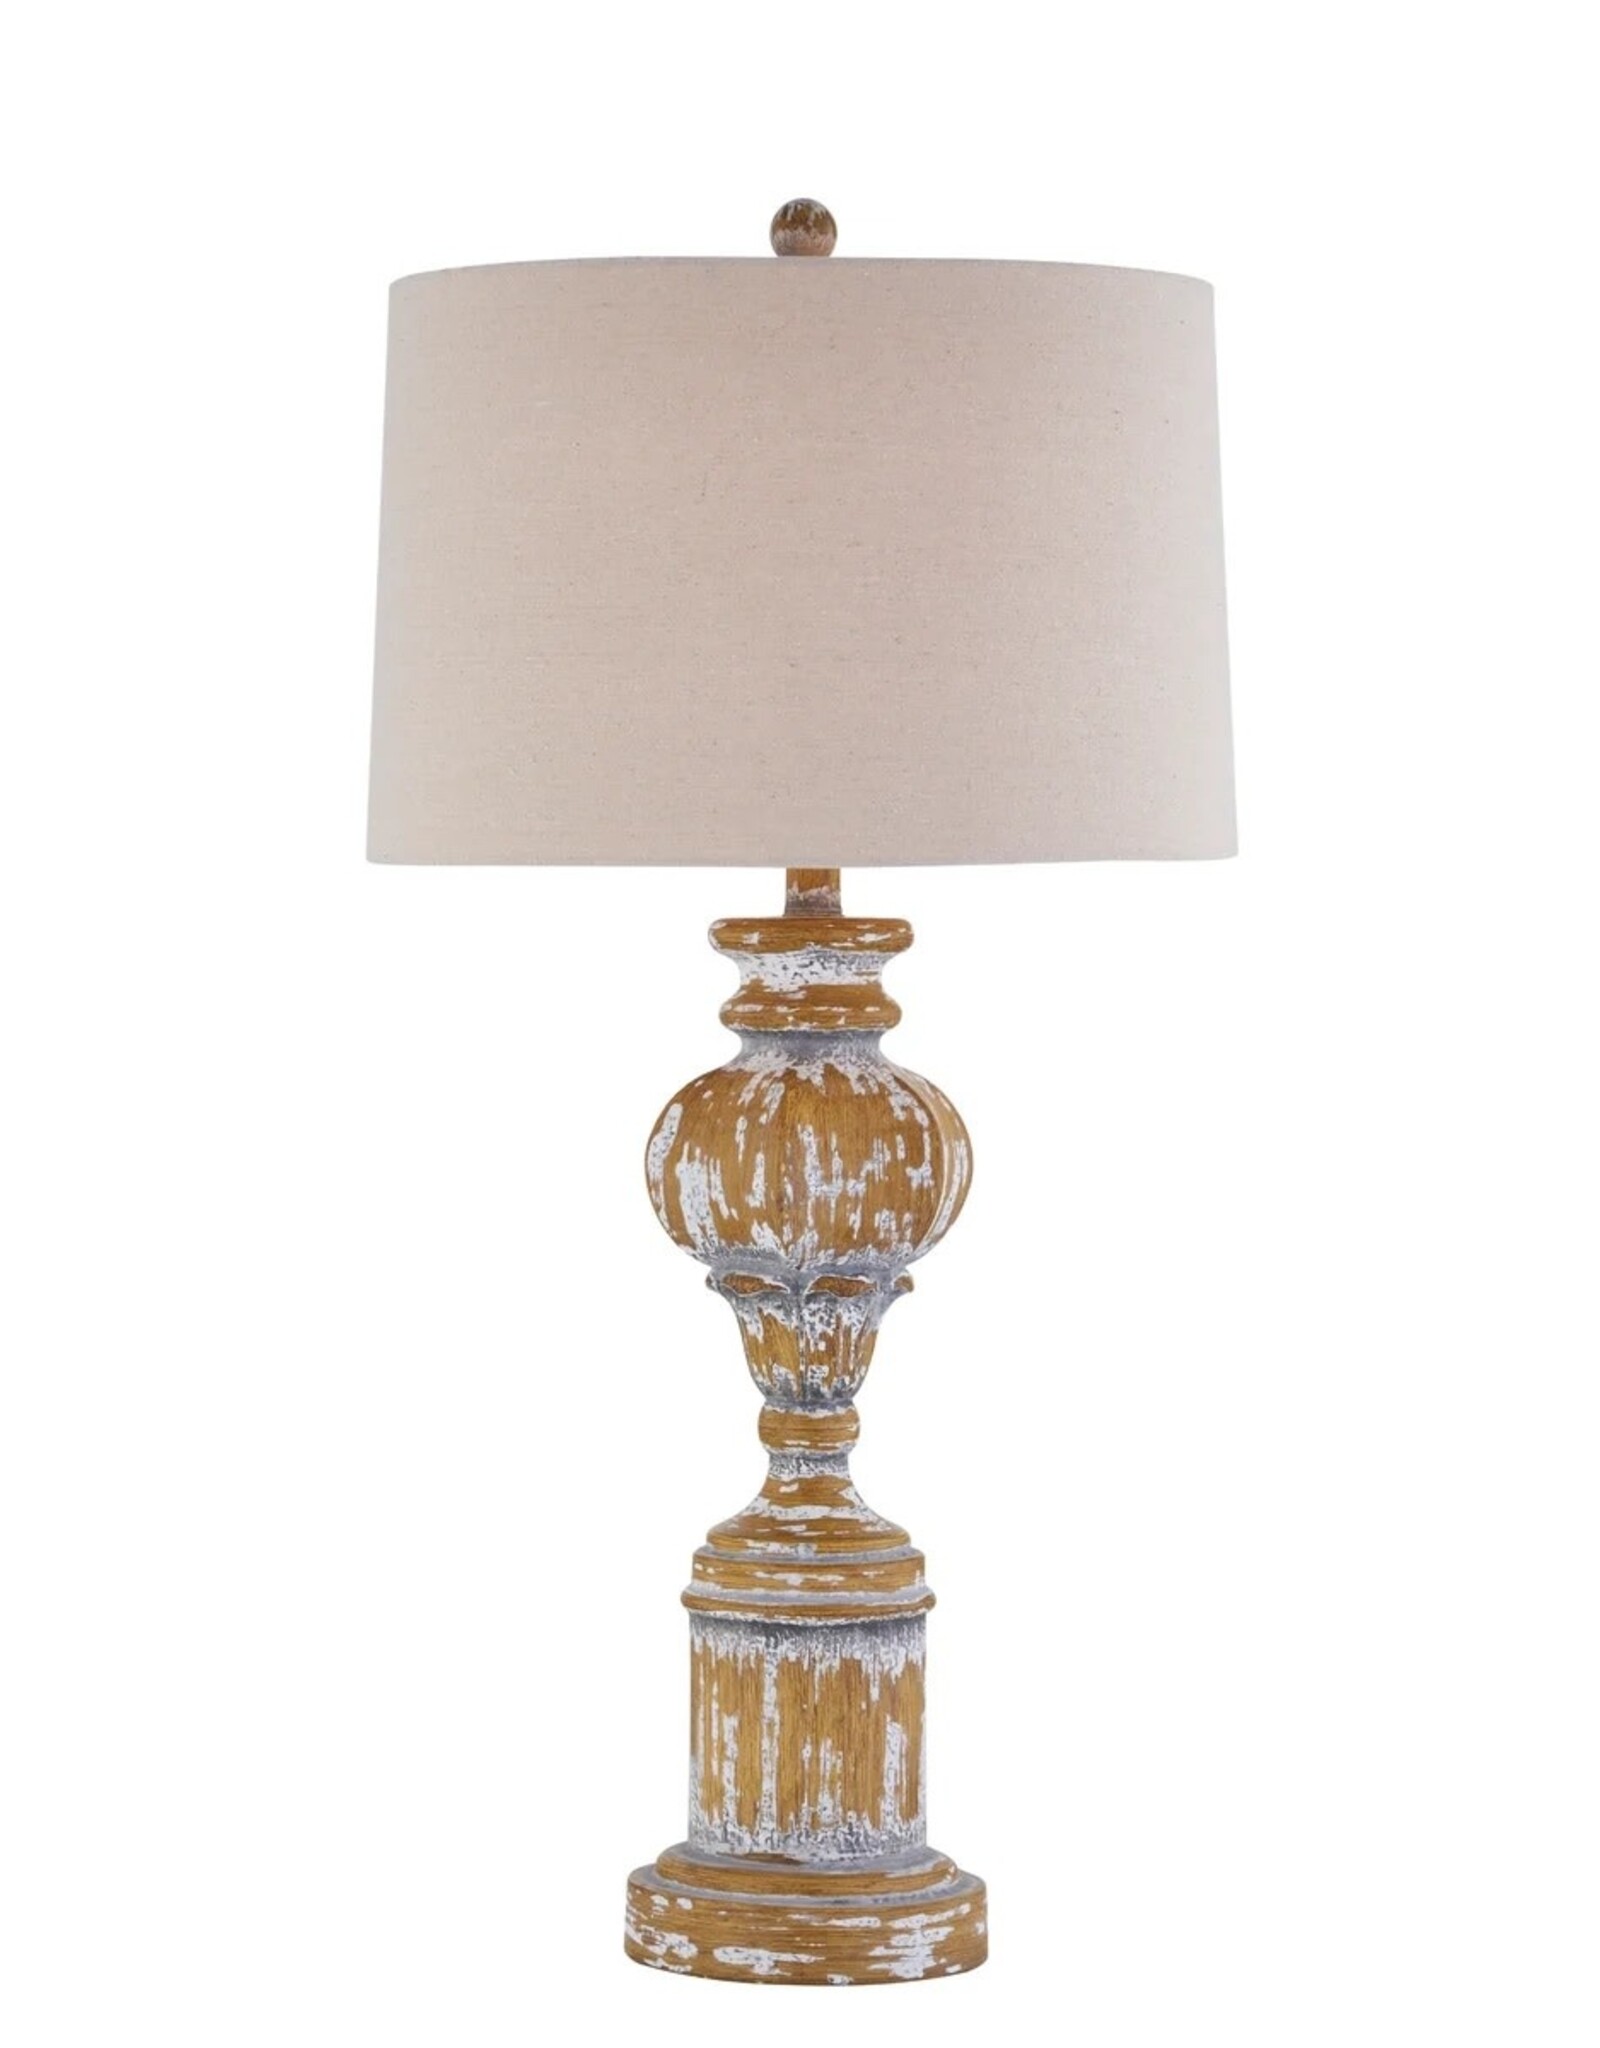 Forty West Designs Russell Table Lamp